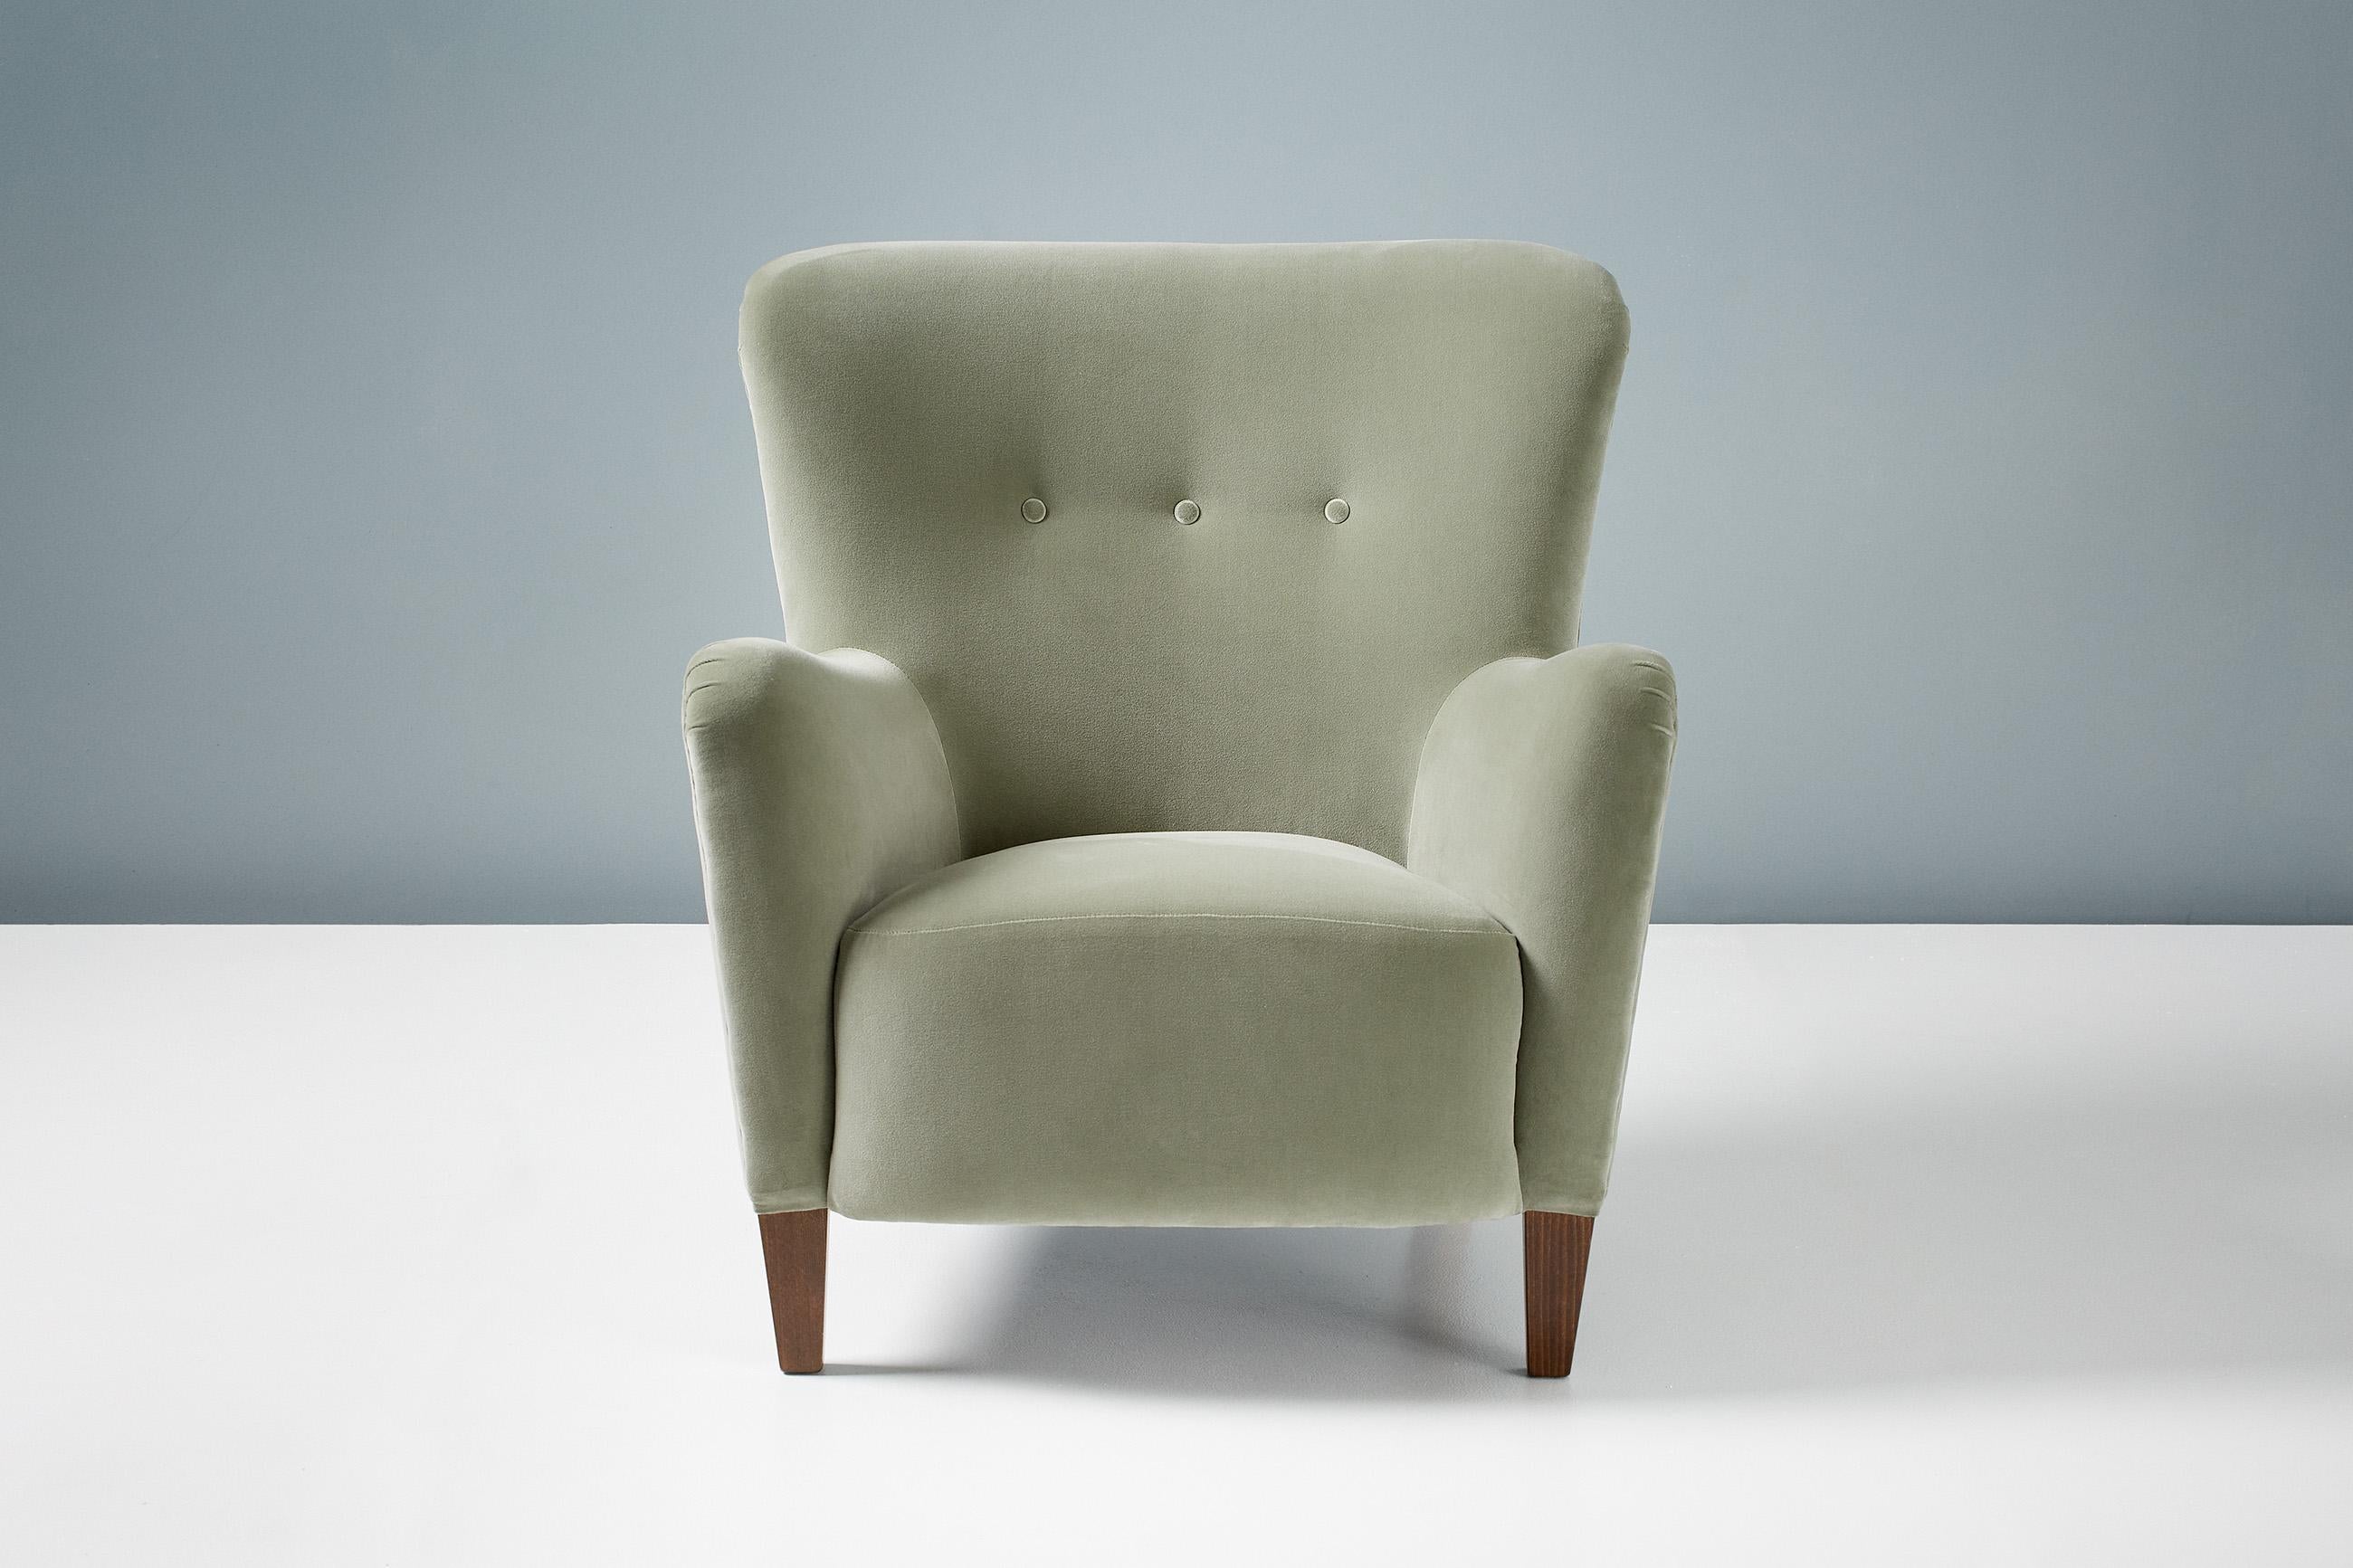 Dagmar design

RYO armchair

custom made lounge chair developed and produced at our workshops in London using the highest quality materials. This example is upholstered in luxurious cotton velvet and feature stained beach legs. The RYO chair is